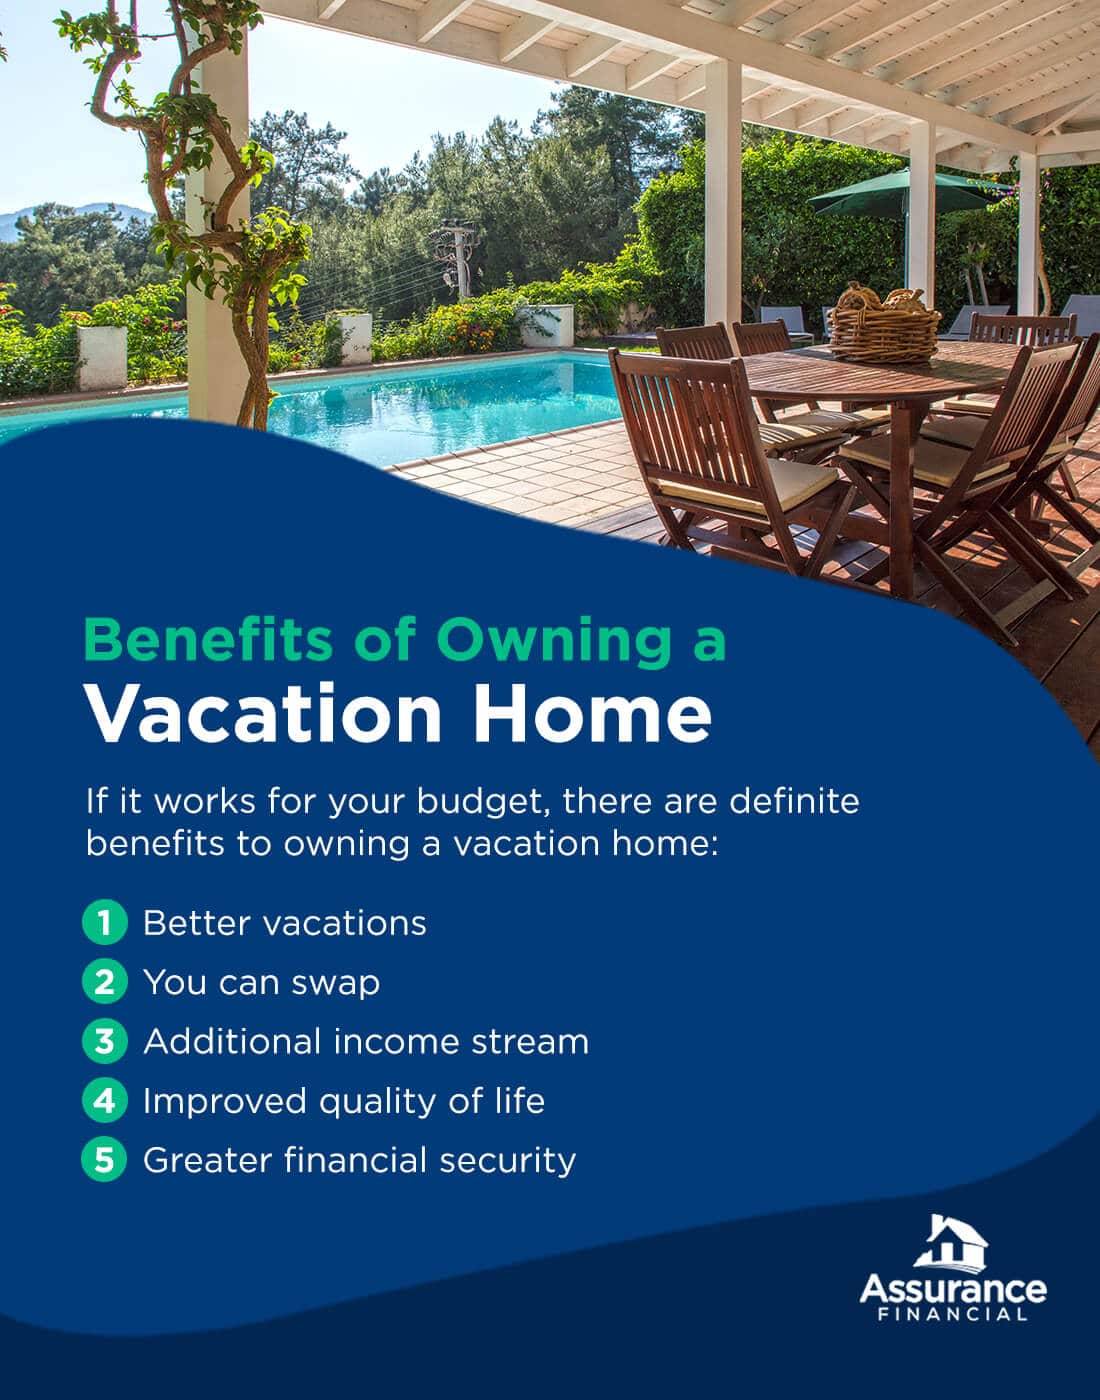 Benefits of Owning a Vacation Home